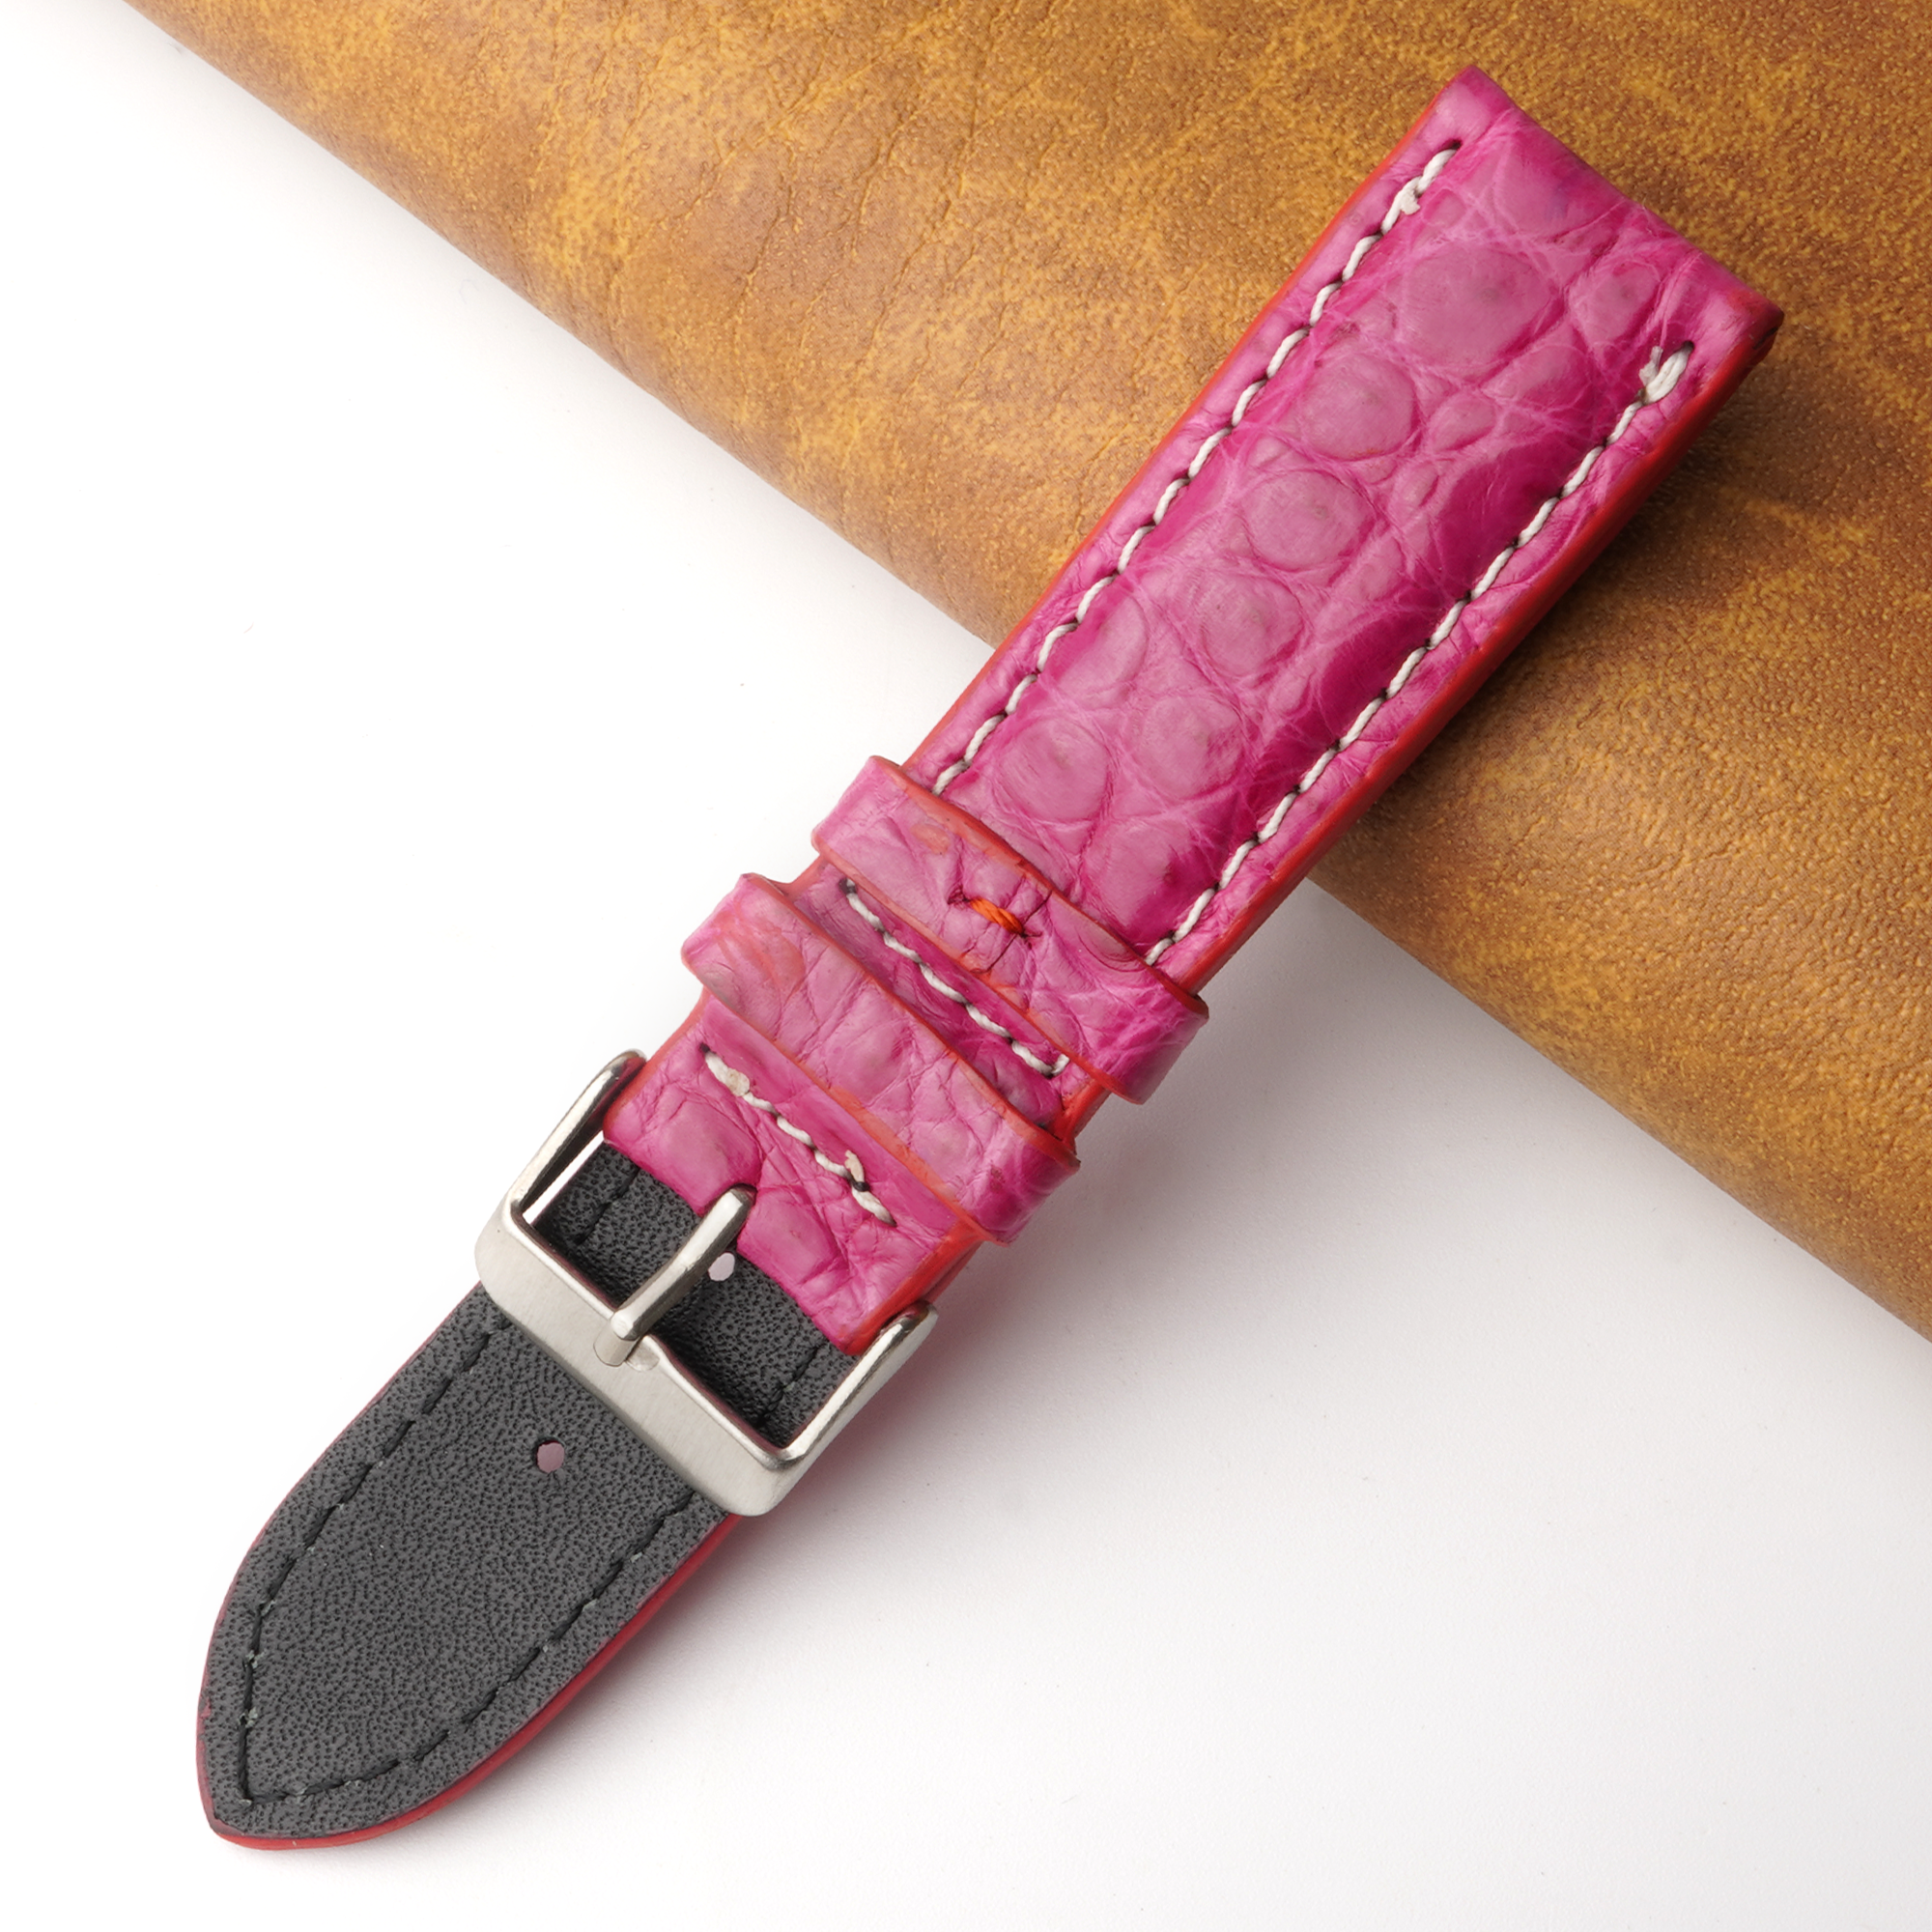 21mm Pink Unique Pattern Alligator Leather Watch Band For Men DH-226L